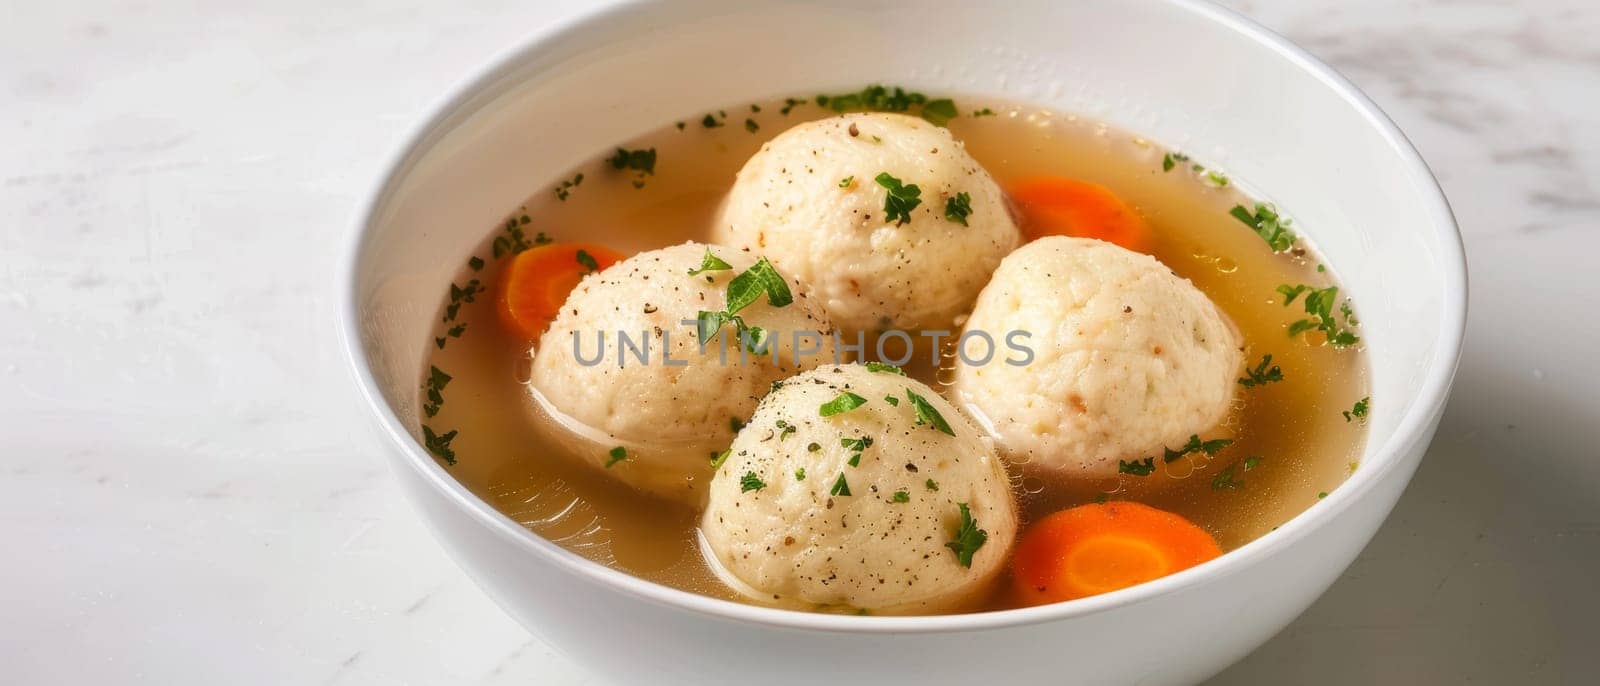 A warm bowl of matzo ball soup with three fluffy matzo balls, carrot slices, and fresh parsley on a marble surface